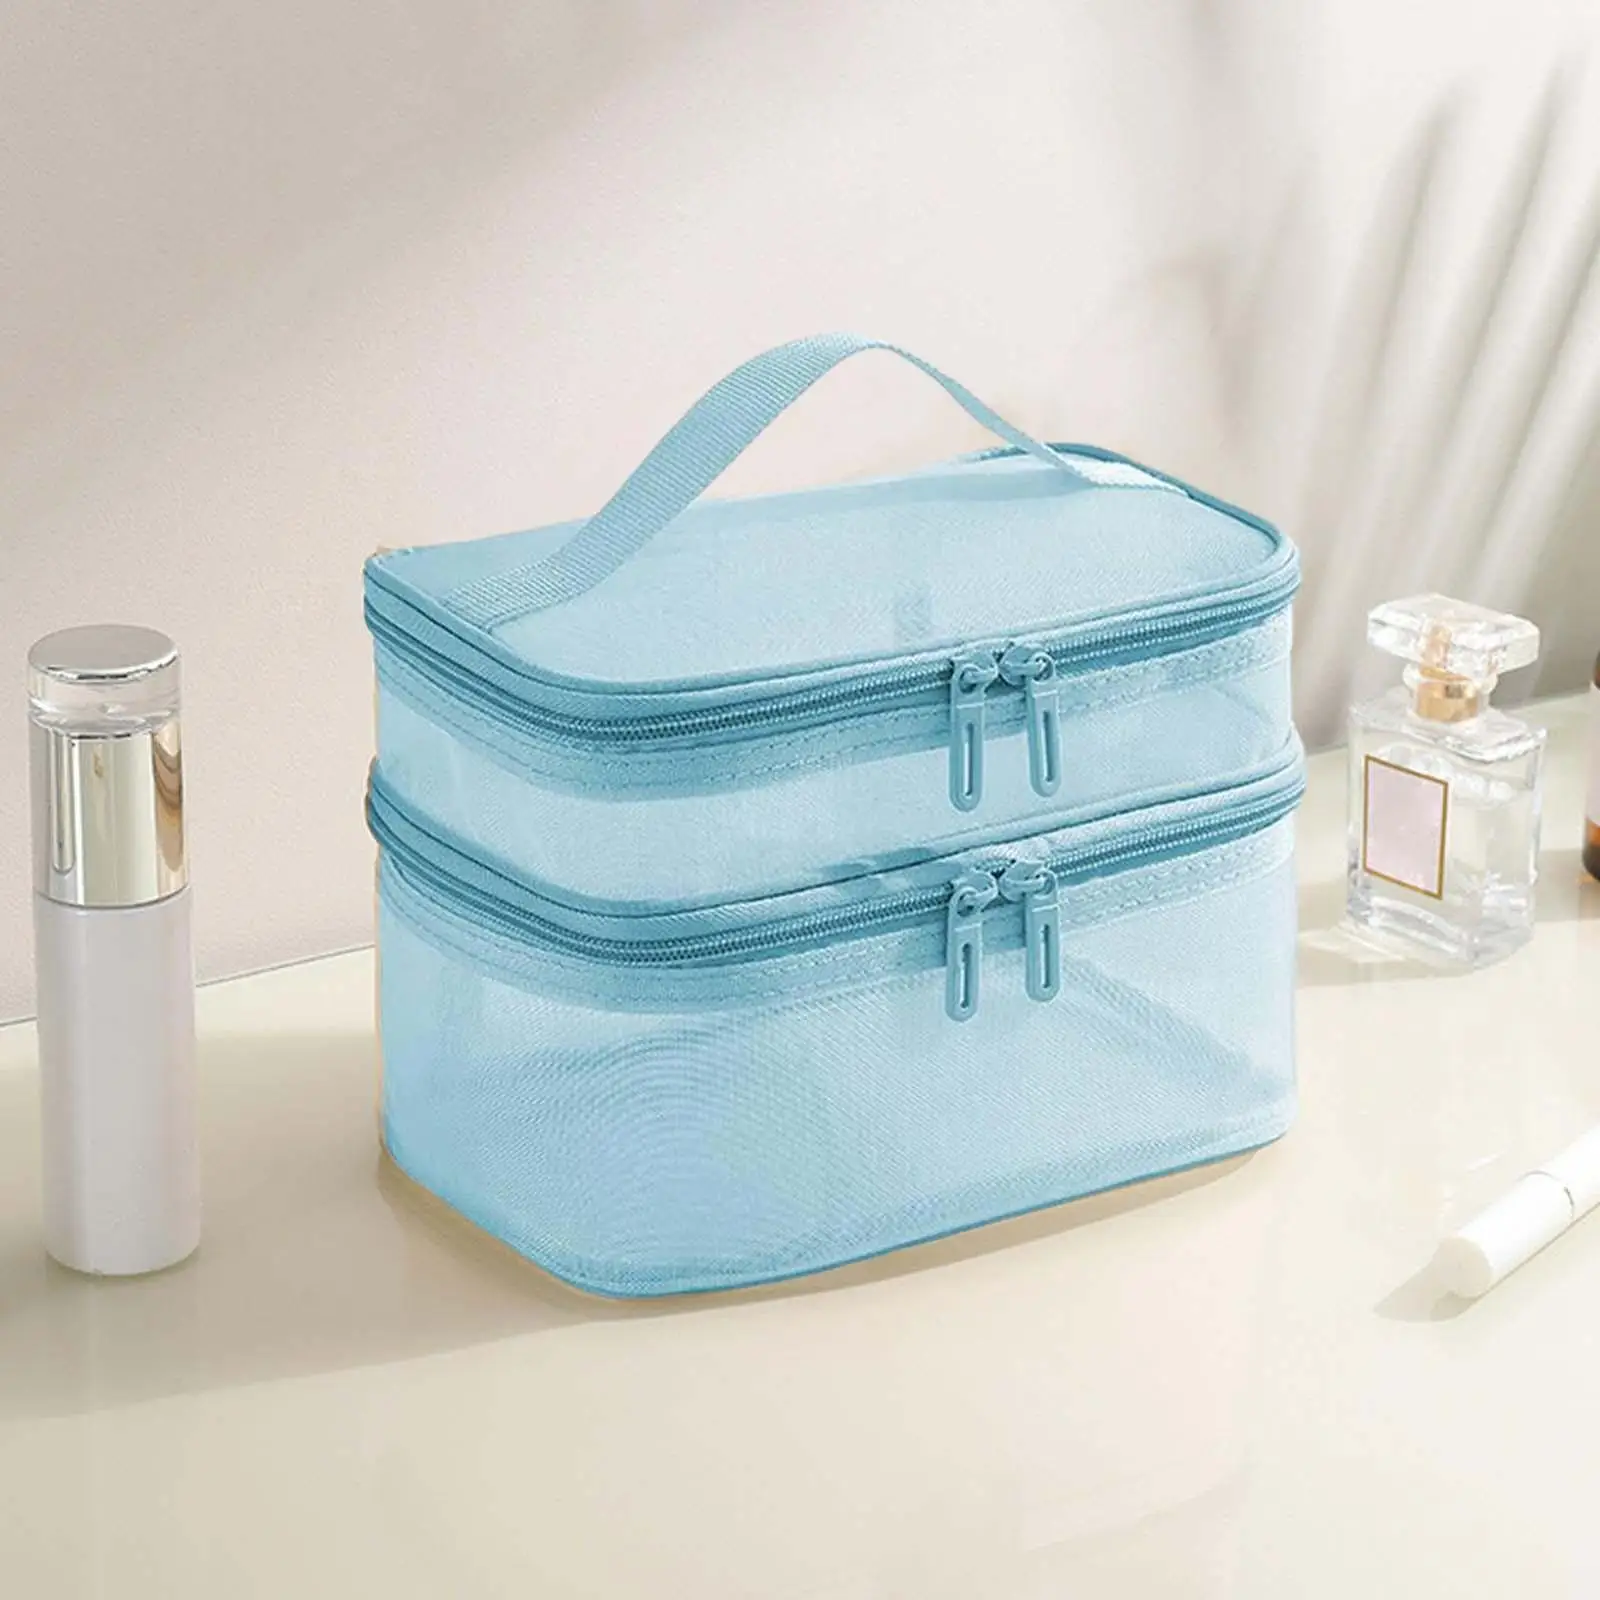 Double Layer Cosmetic Bag with Handle Foldable Toiletry Bag for Full Size Bottles Jewelry Accessories Toiletries Women and Girls